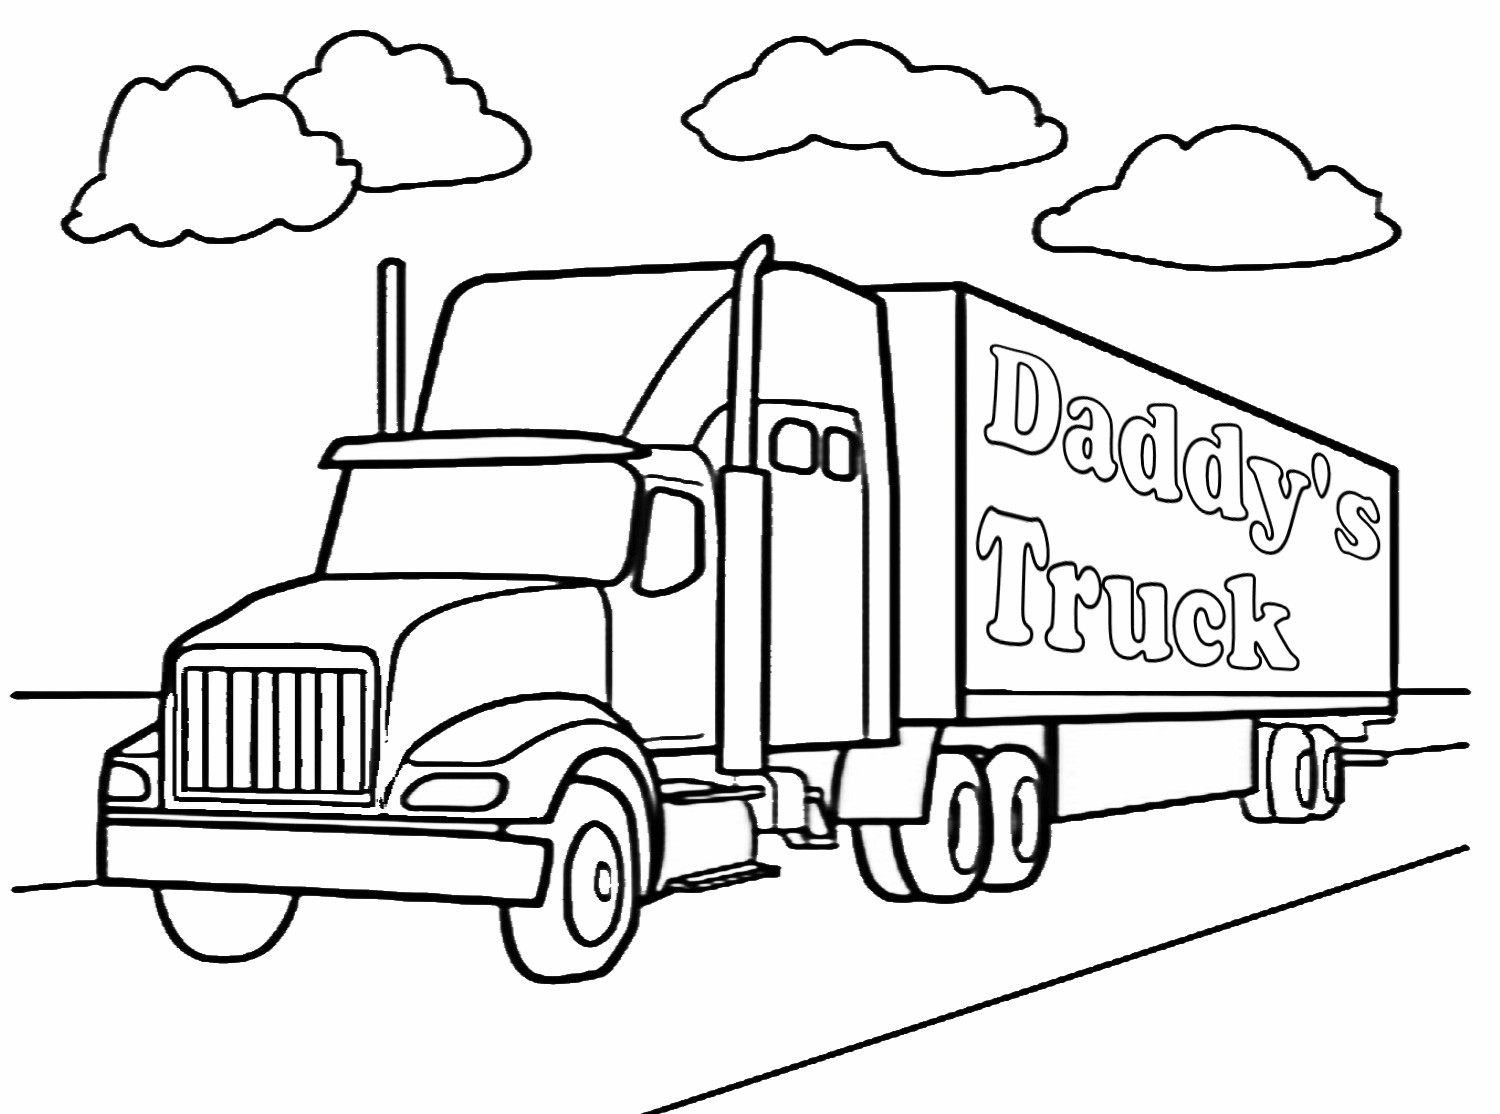 tractor-trailer-coloring-page-sketch-coloring-page